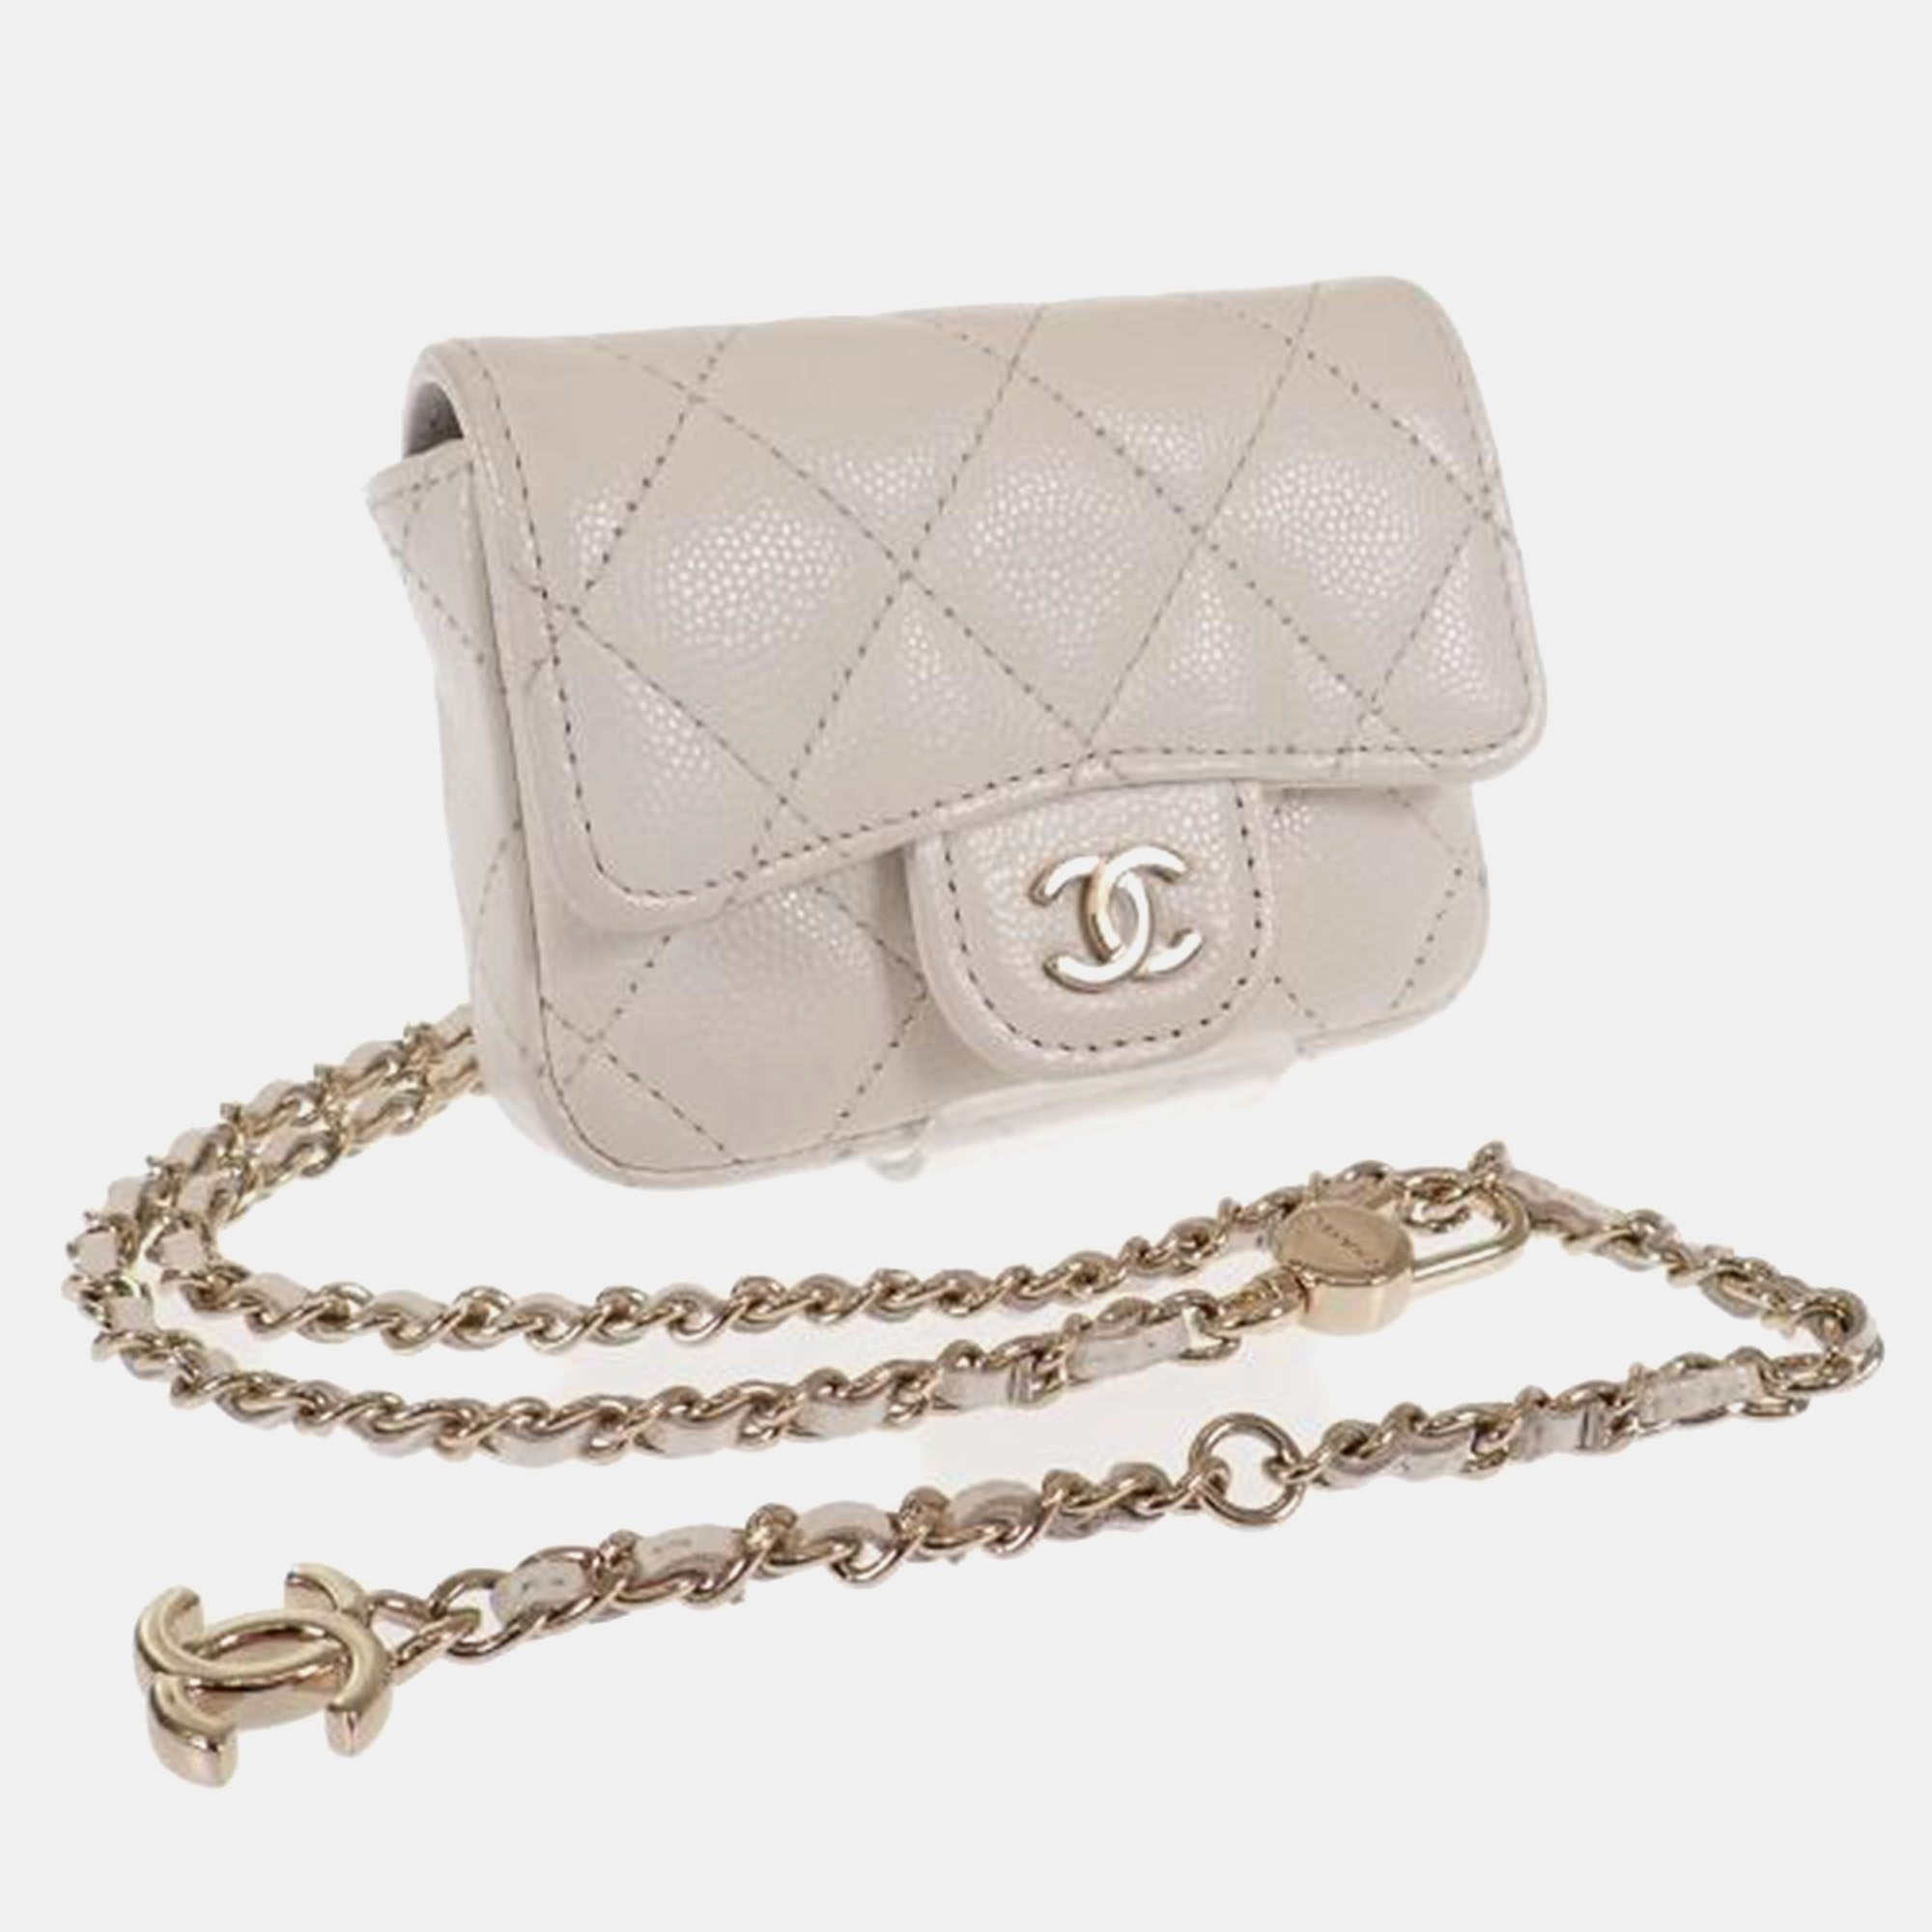 Pre-owned Chanel White Leather Cc Caviar Quilted Belt Bag